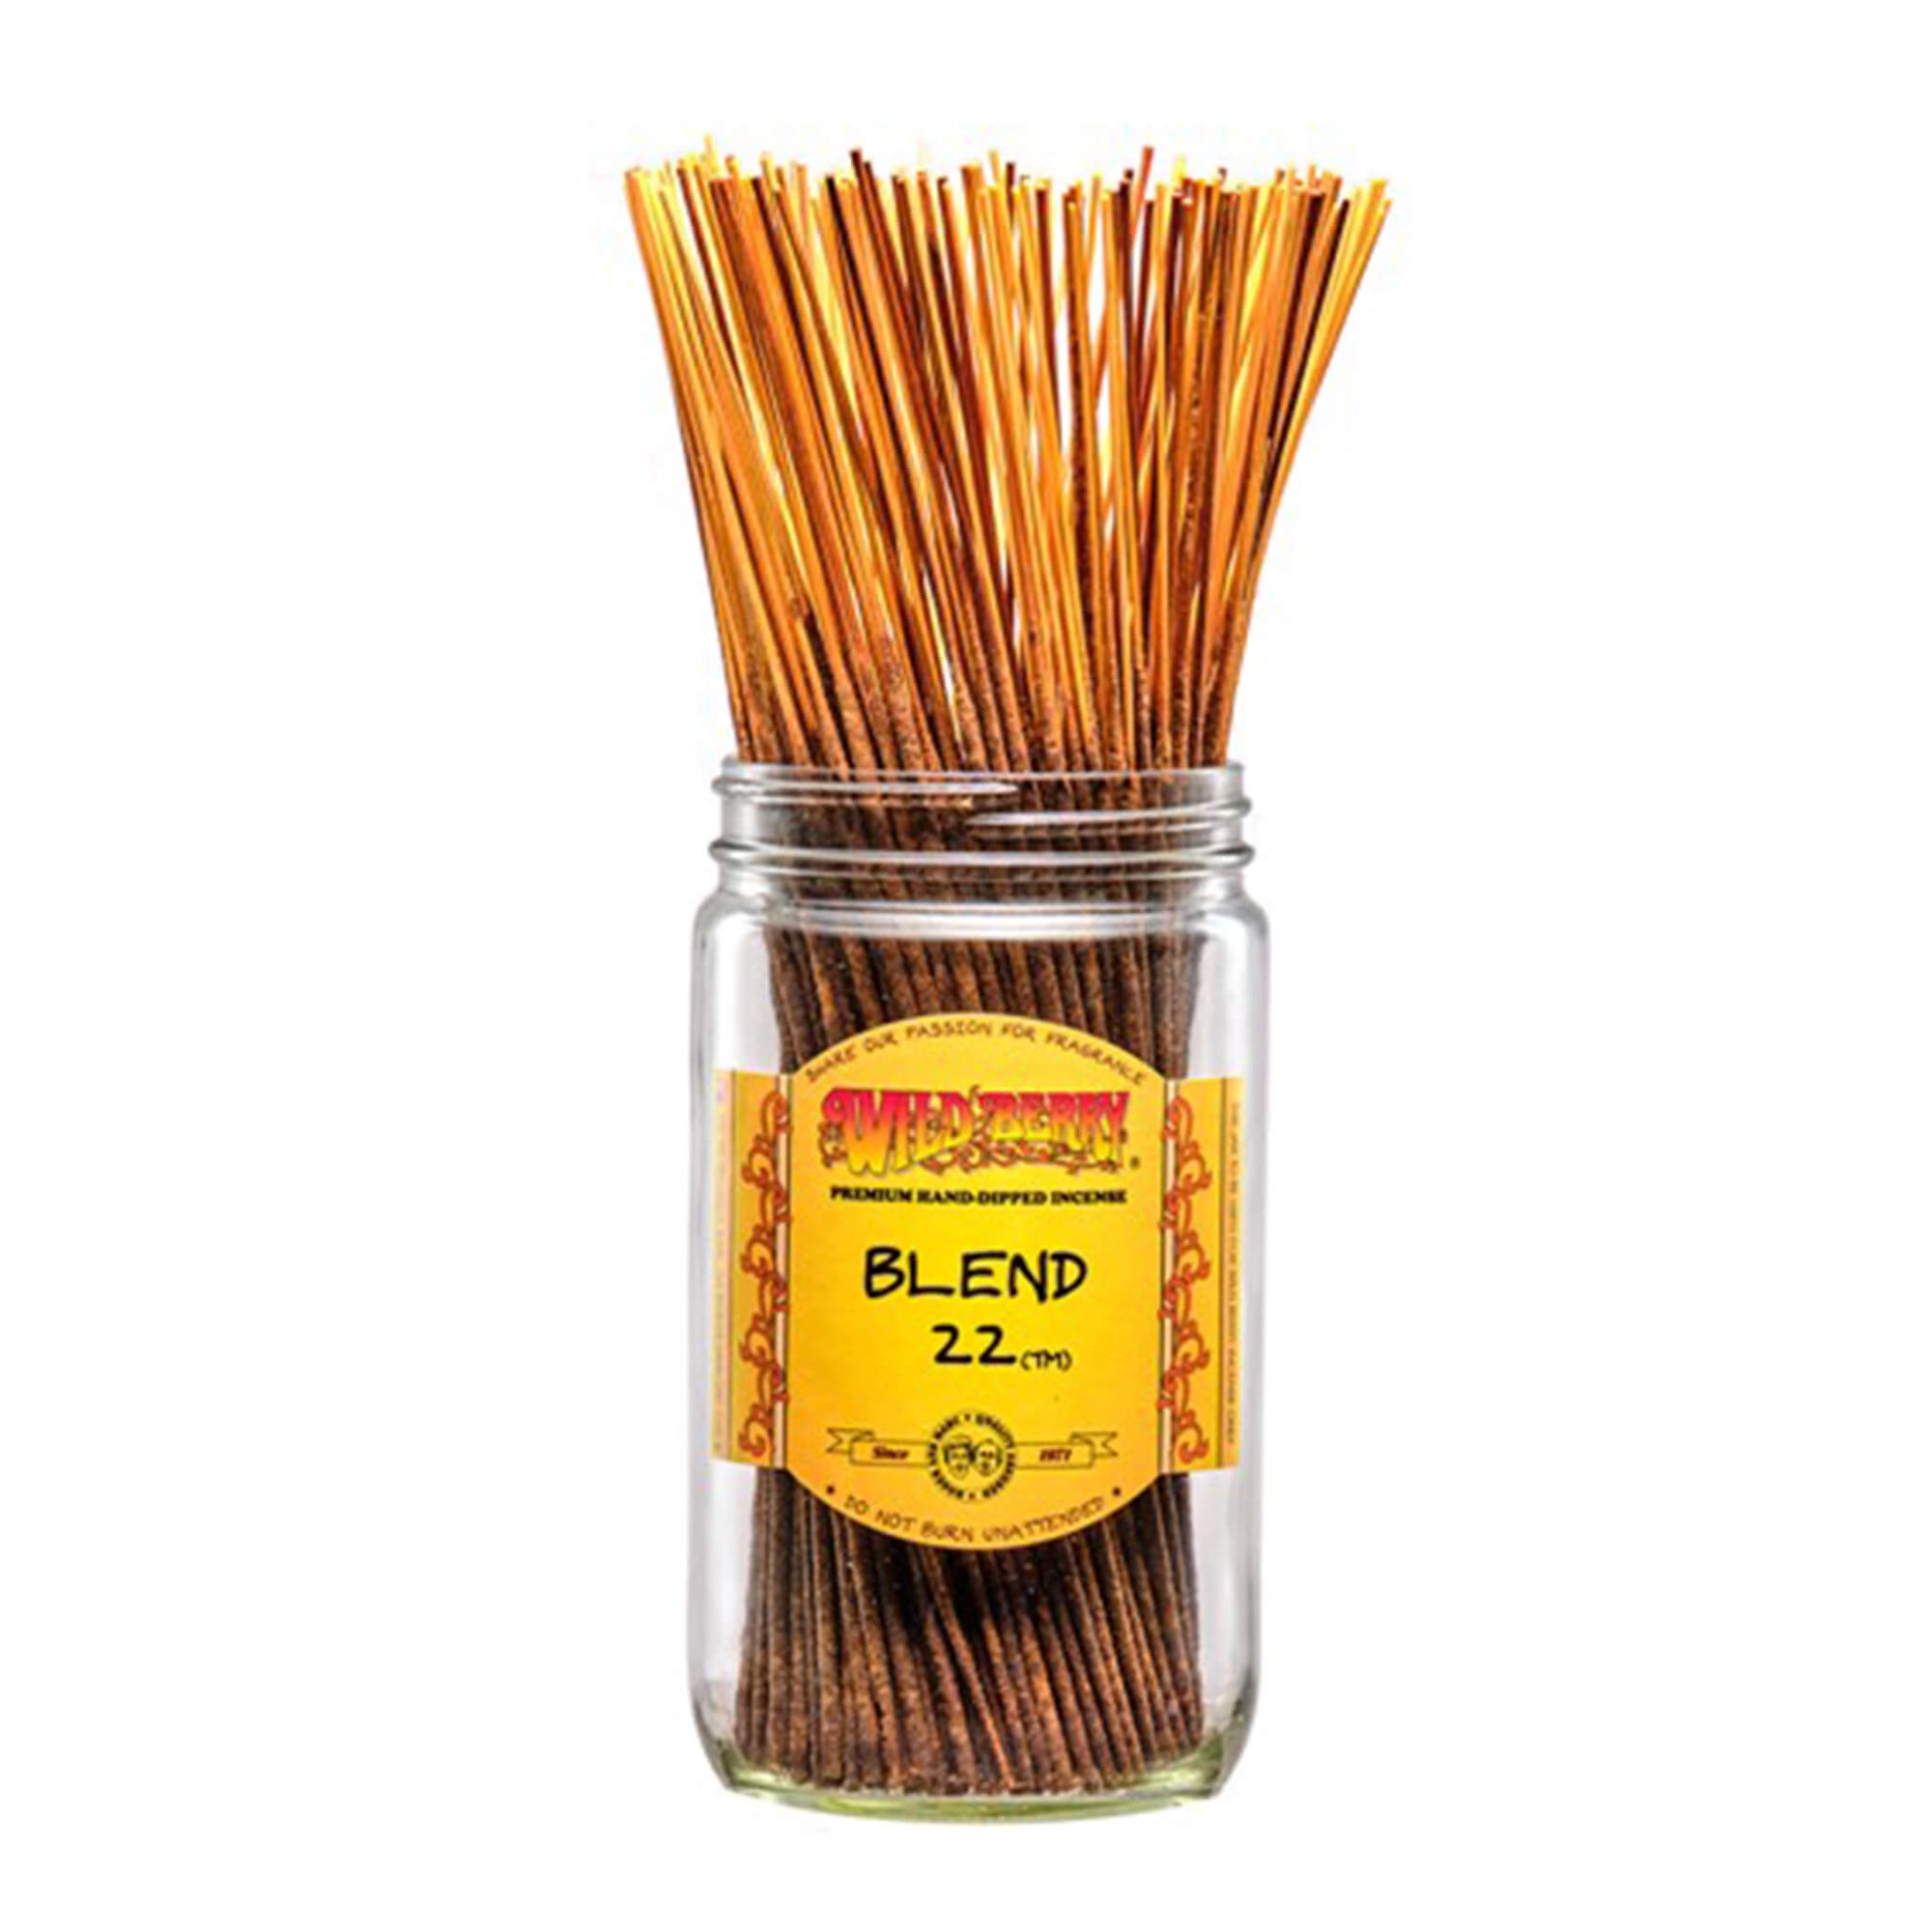 Blend 22™ Incense Sticks | Profile View In Jar | the dabbing specialists